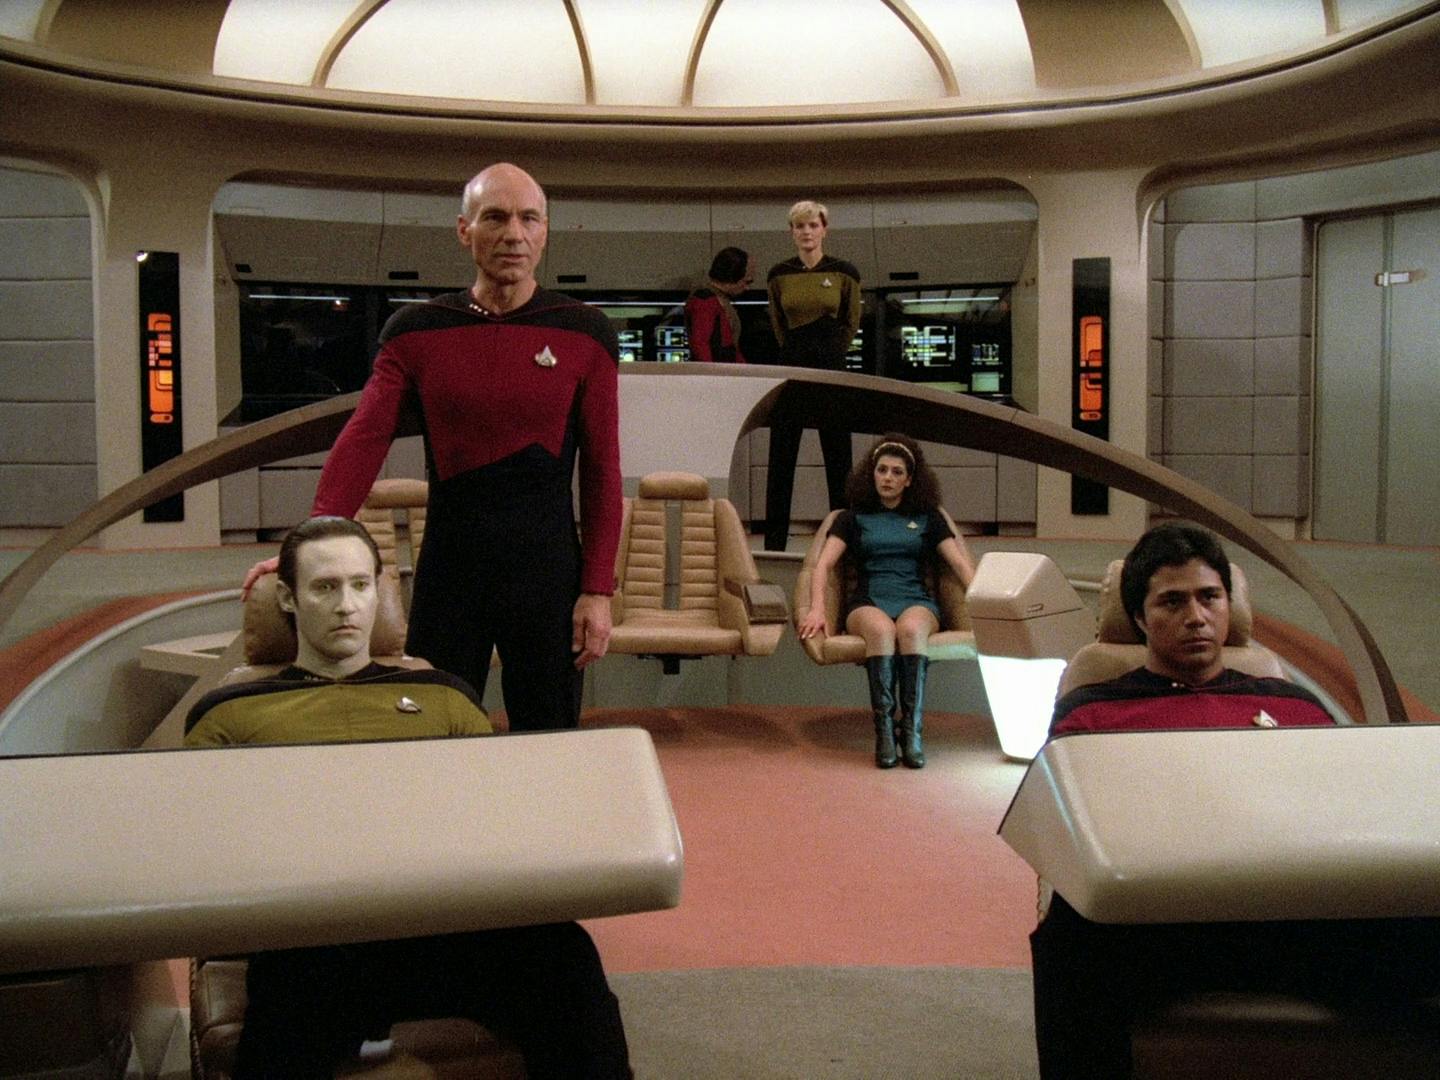 Captain Jean-Luc Picard walks onto the bridge of the Enterprise-D, stands behind Data, looking out to the viewscreen in 'Encounter at Farpoint'